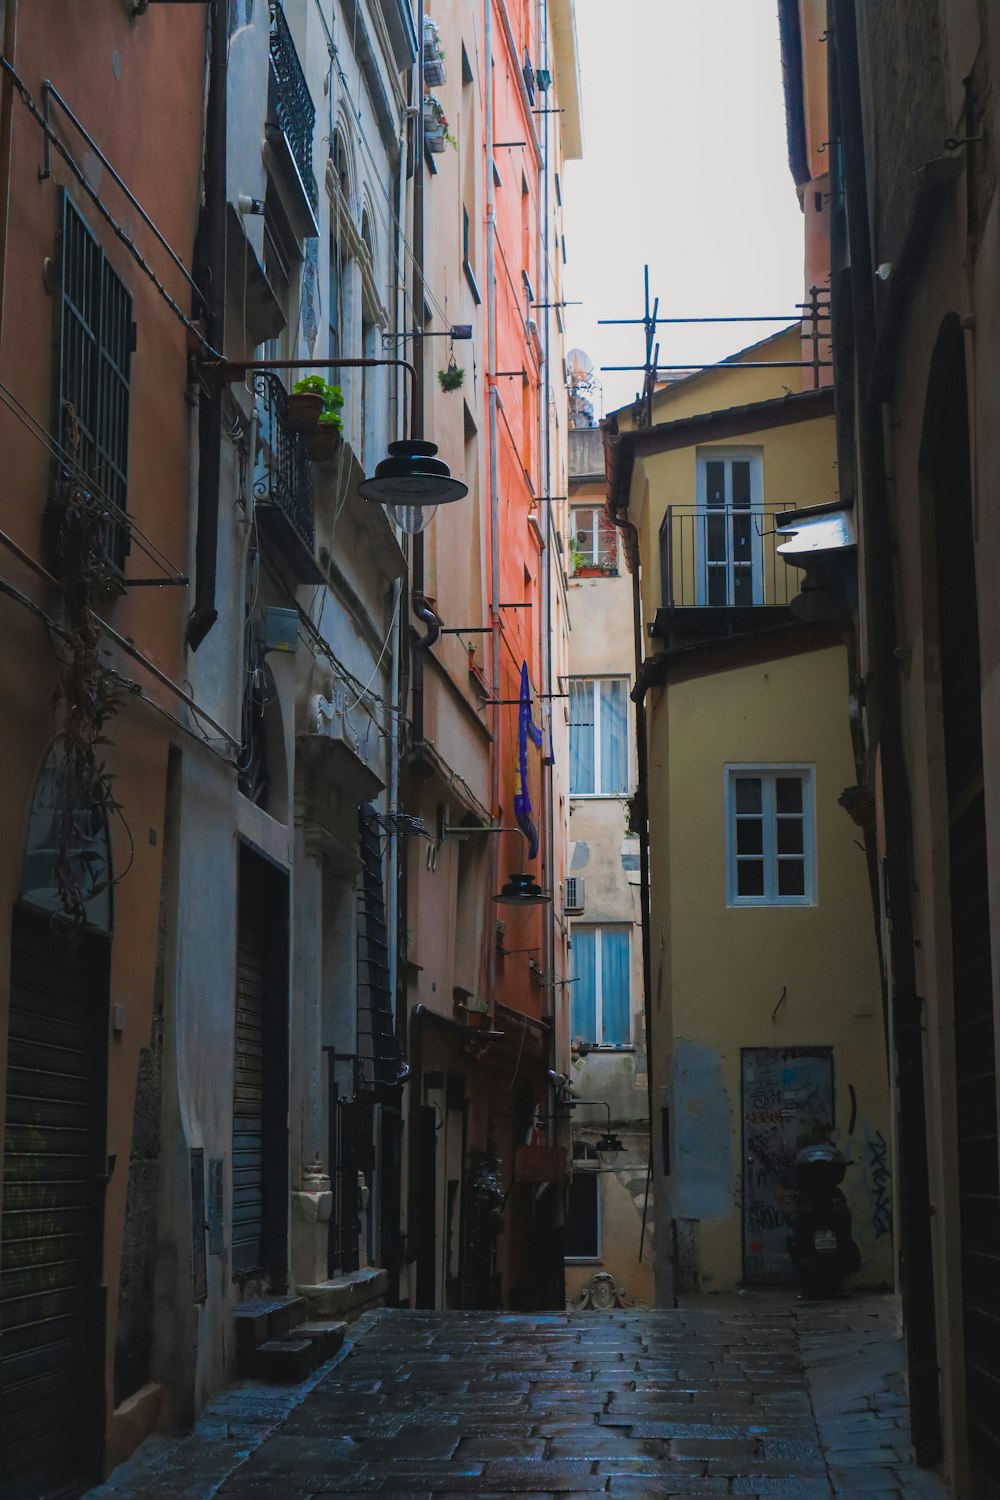 a narrow alleyway with a few buildings on either side